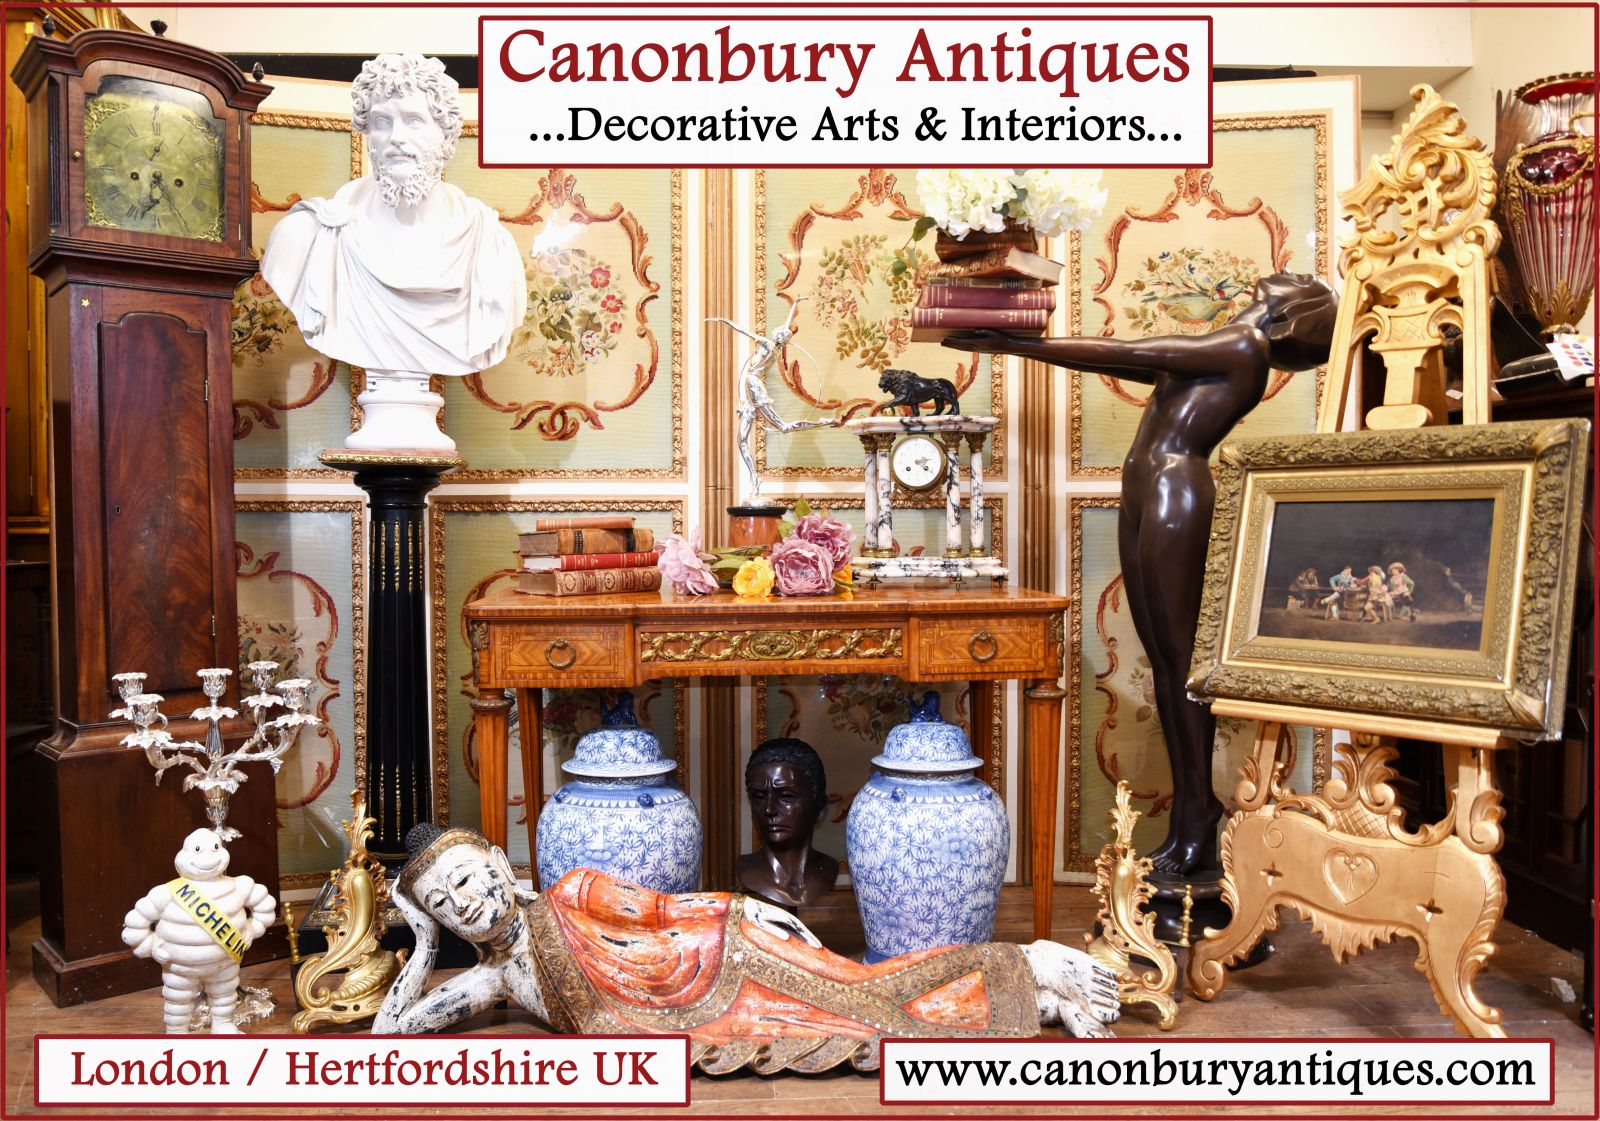 Furniture hire for film shoots from Canonbury Antiques